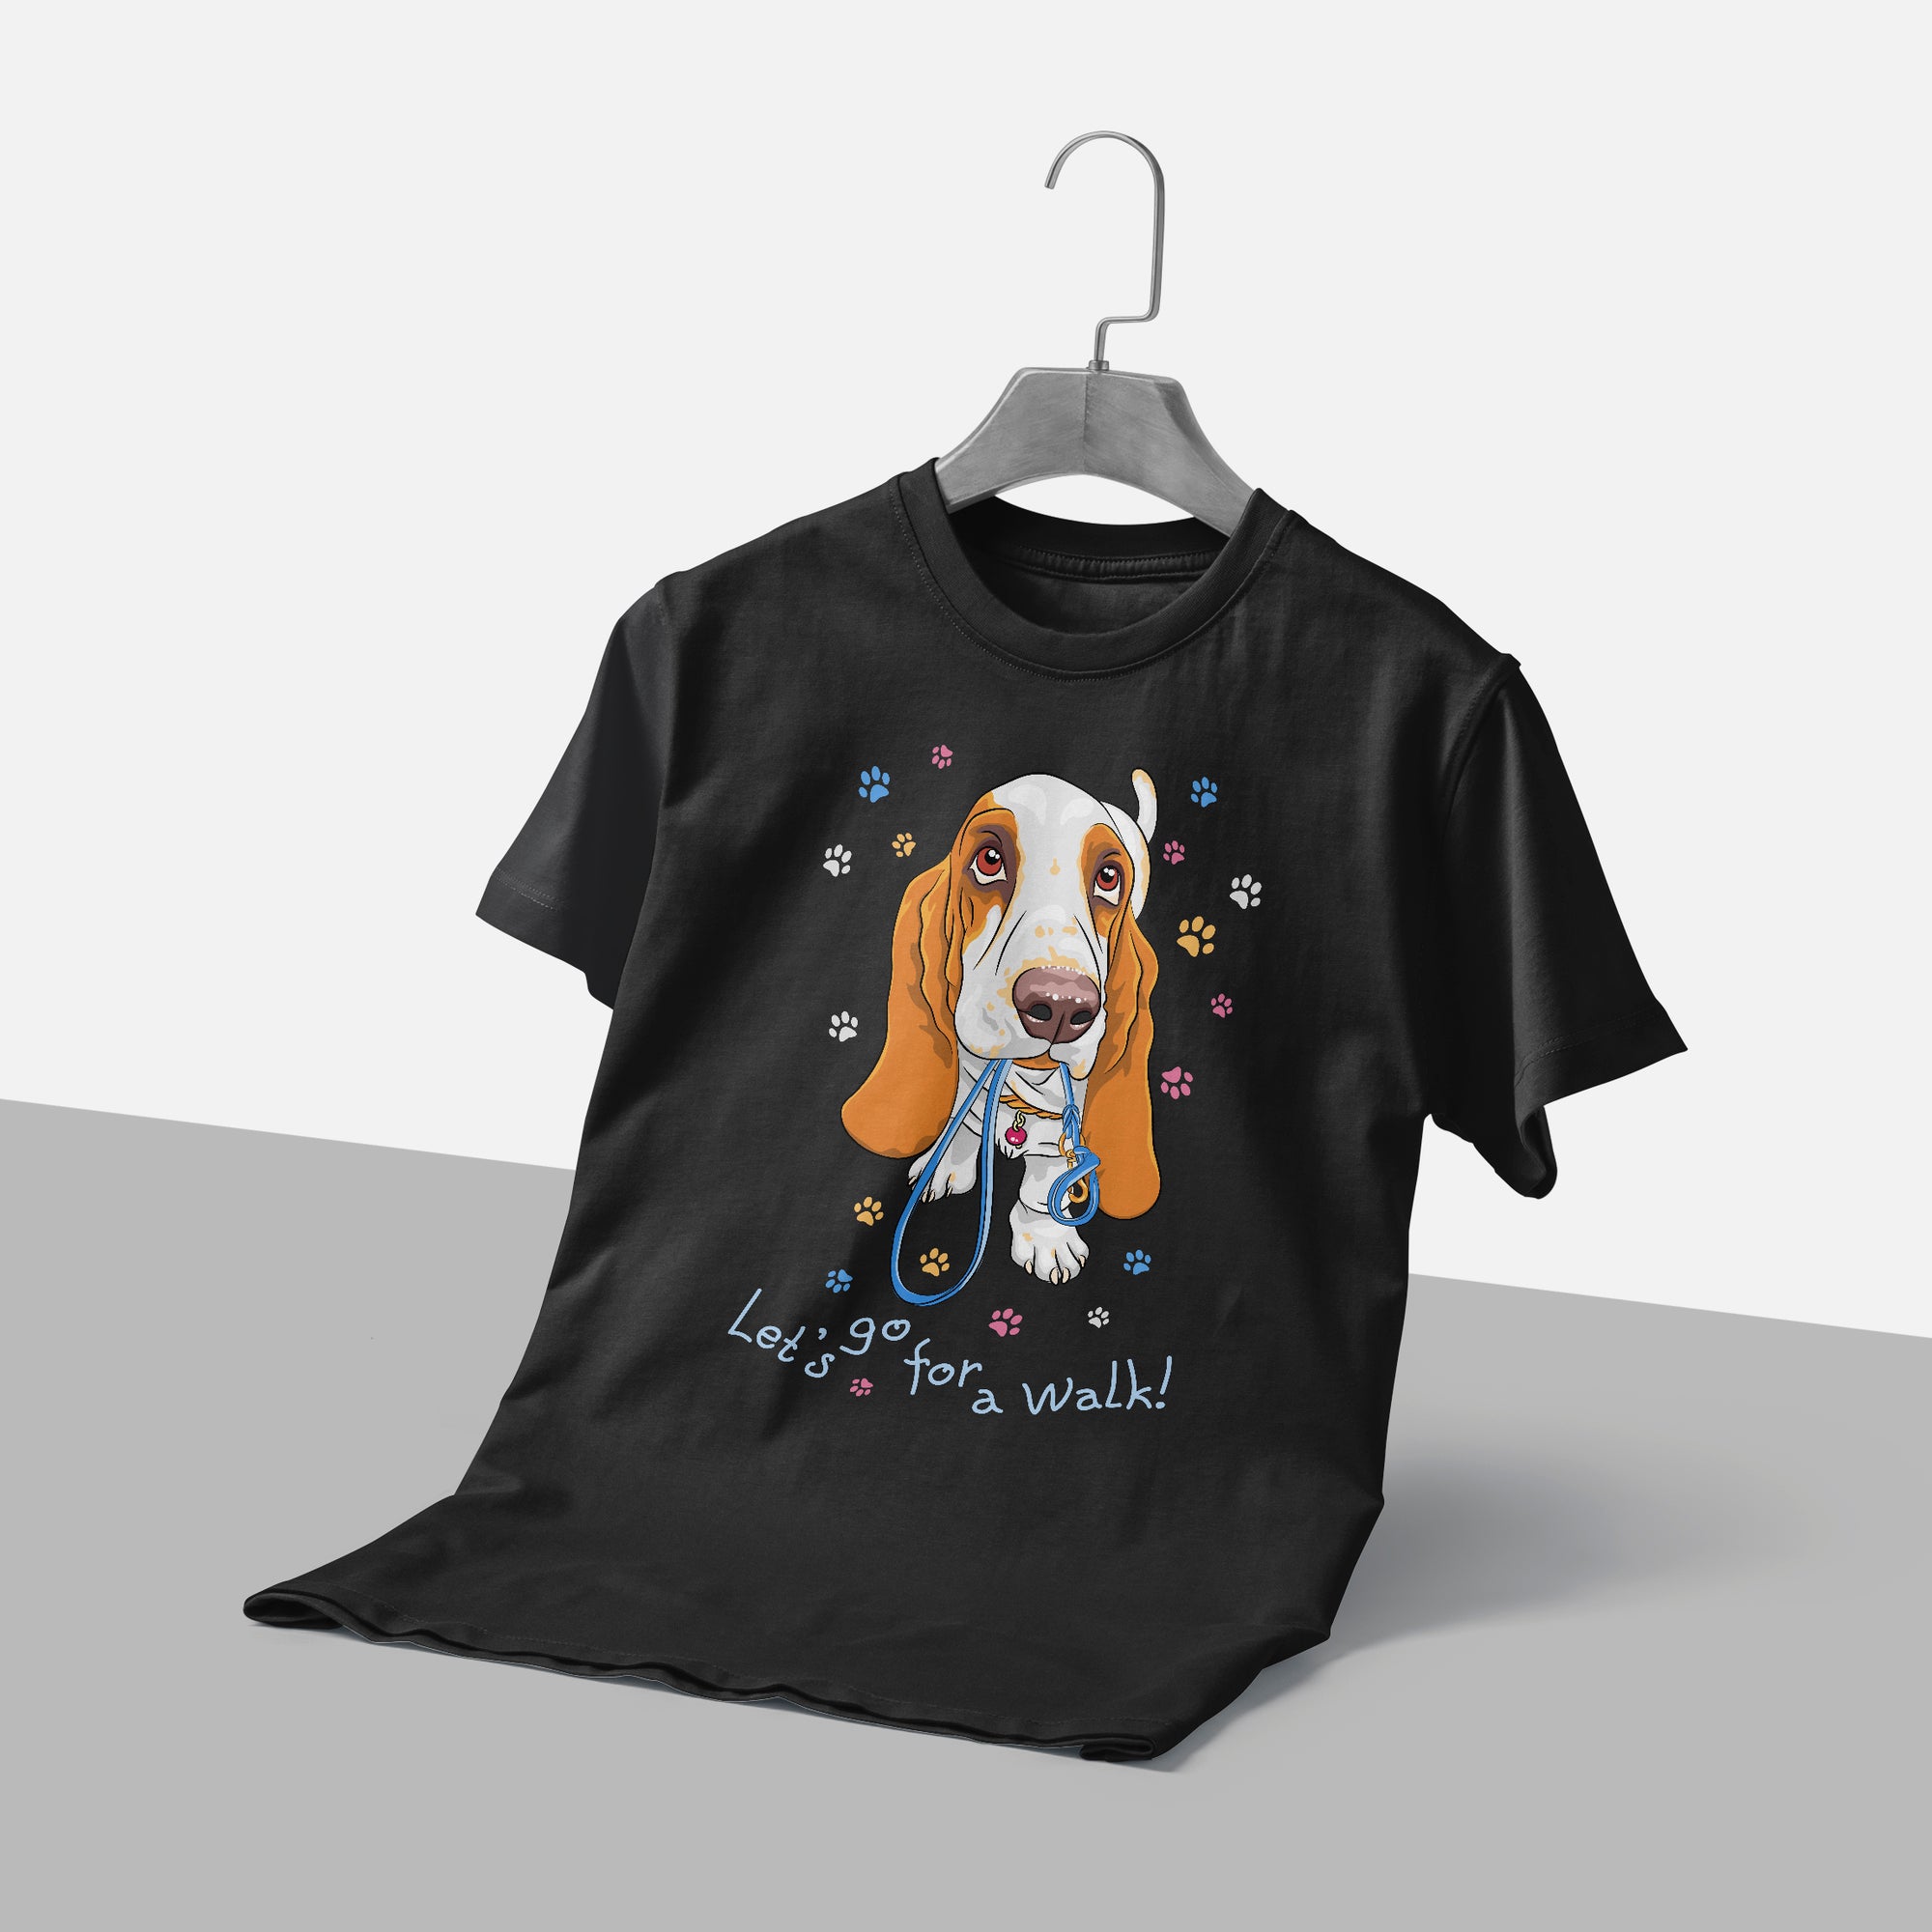 Lets Go for A Walk T-Shirt